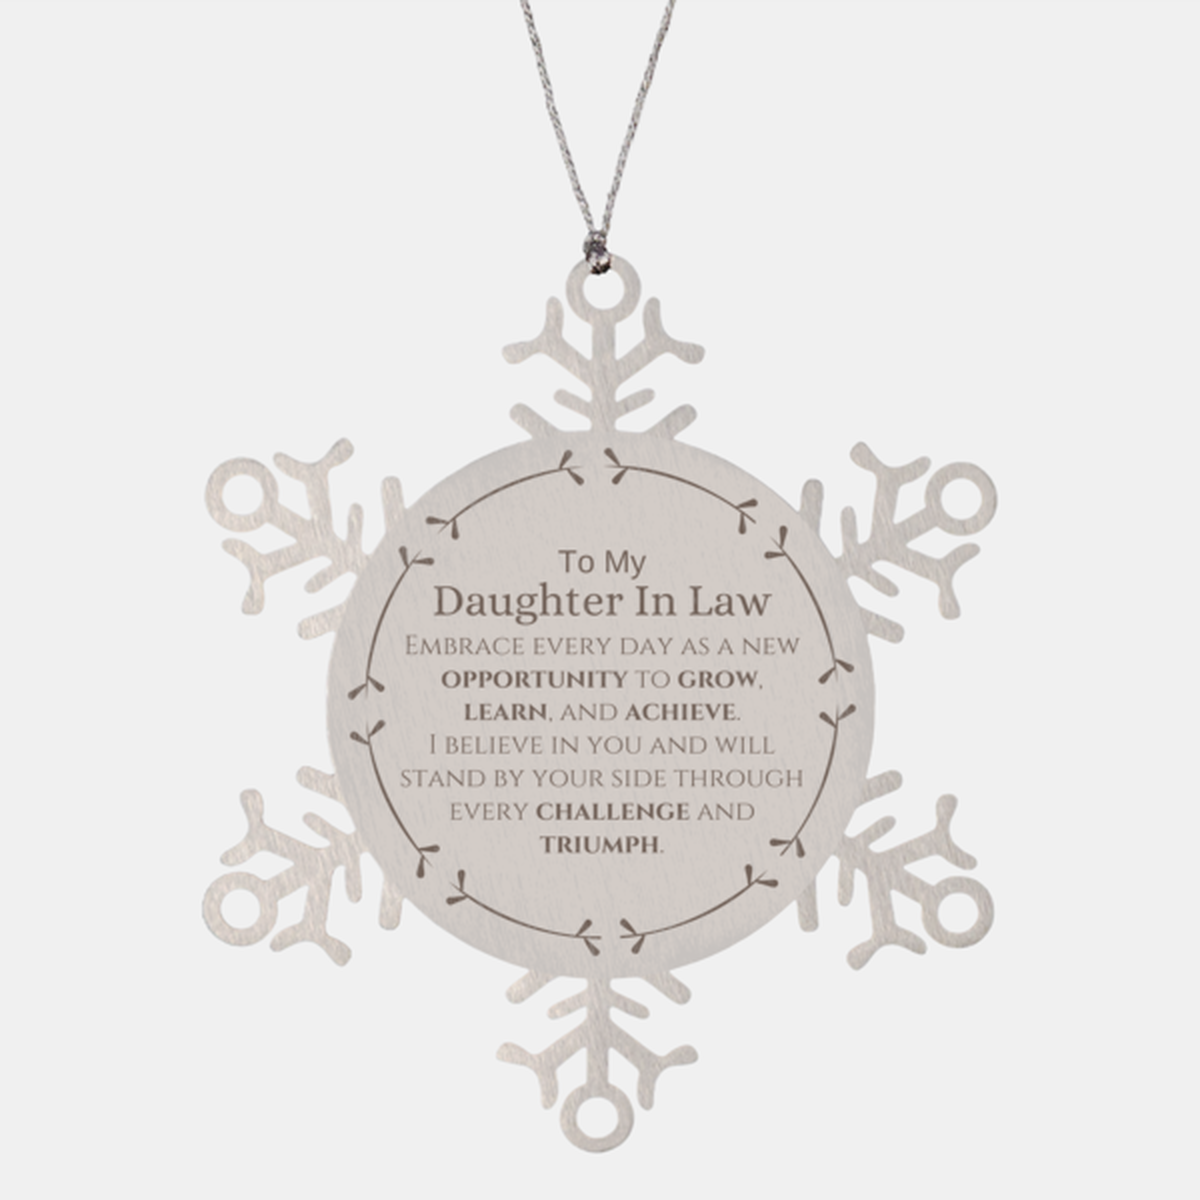 To My Daughter In Law Gifts, I believe in you and will stand by your side, Inspirational Snowflake Ornament For Daughter In Law, Birthday Christmas Motivational Daughter In Law Gifts